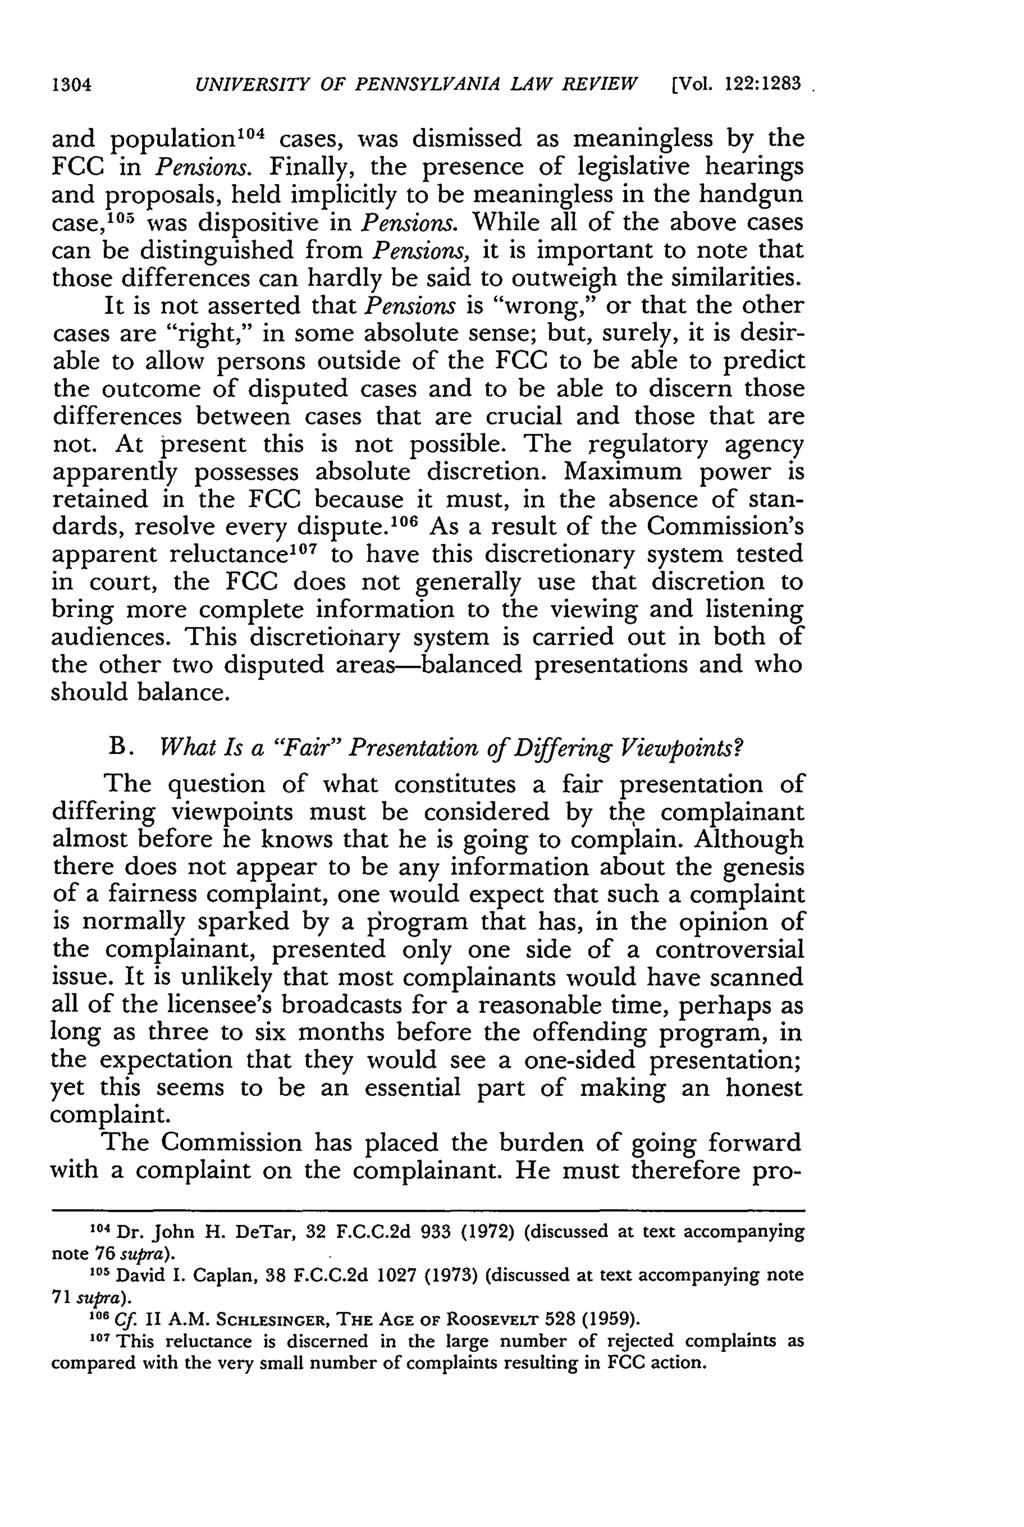 1304 UNIVERSITY OF PENNSYLVANIA LAW REVIEW [Vol. 122:1283 and population 0 4 cases, was dismissed as meaningless by the FCC in Pensions.